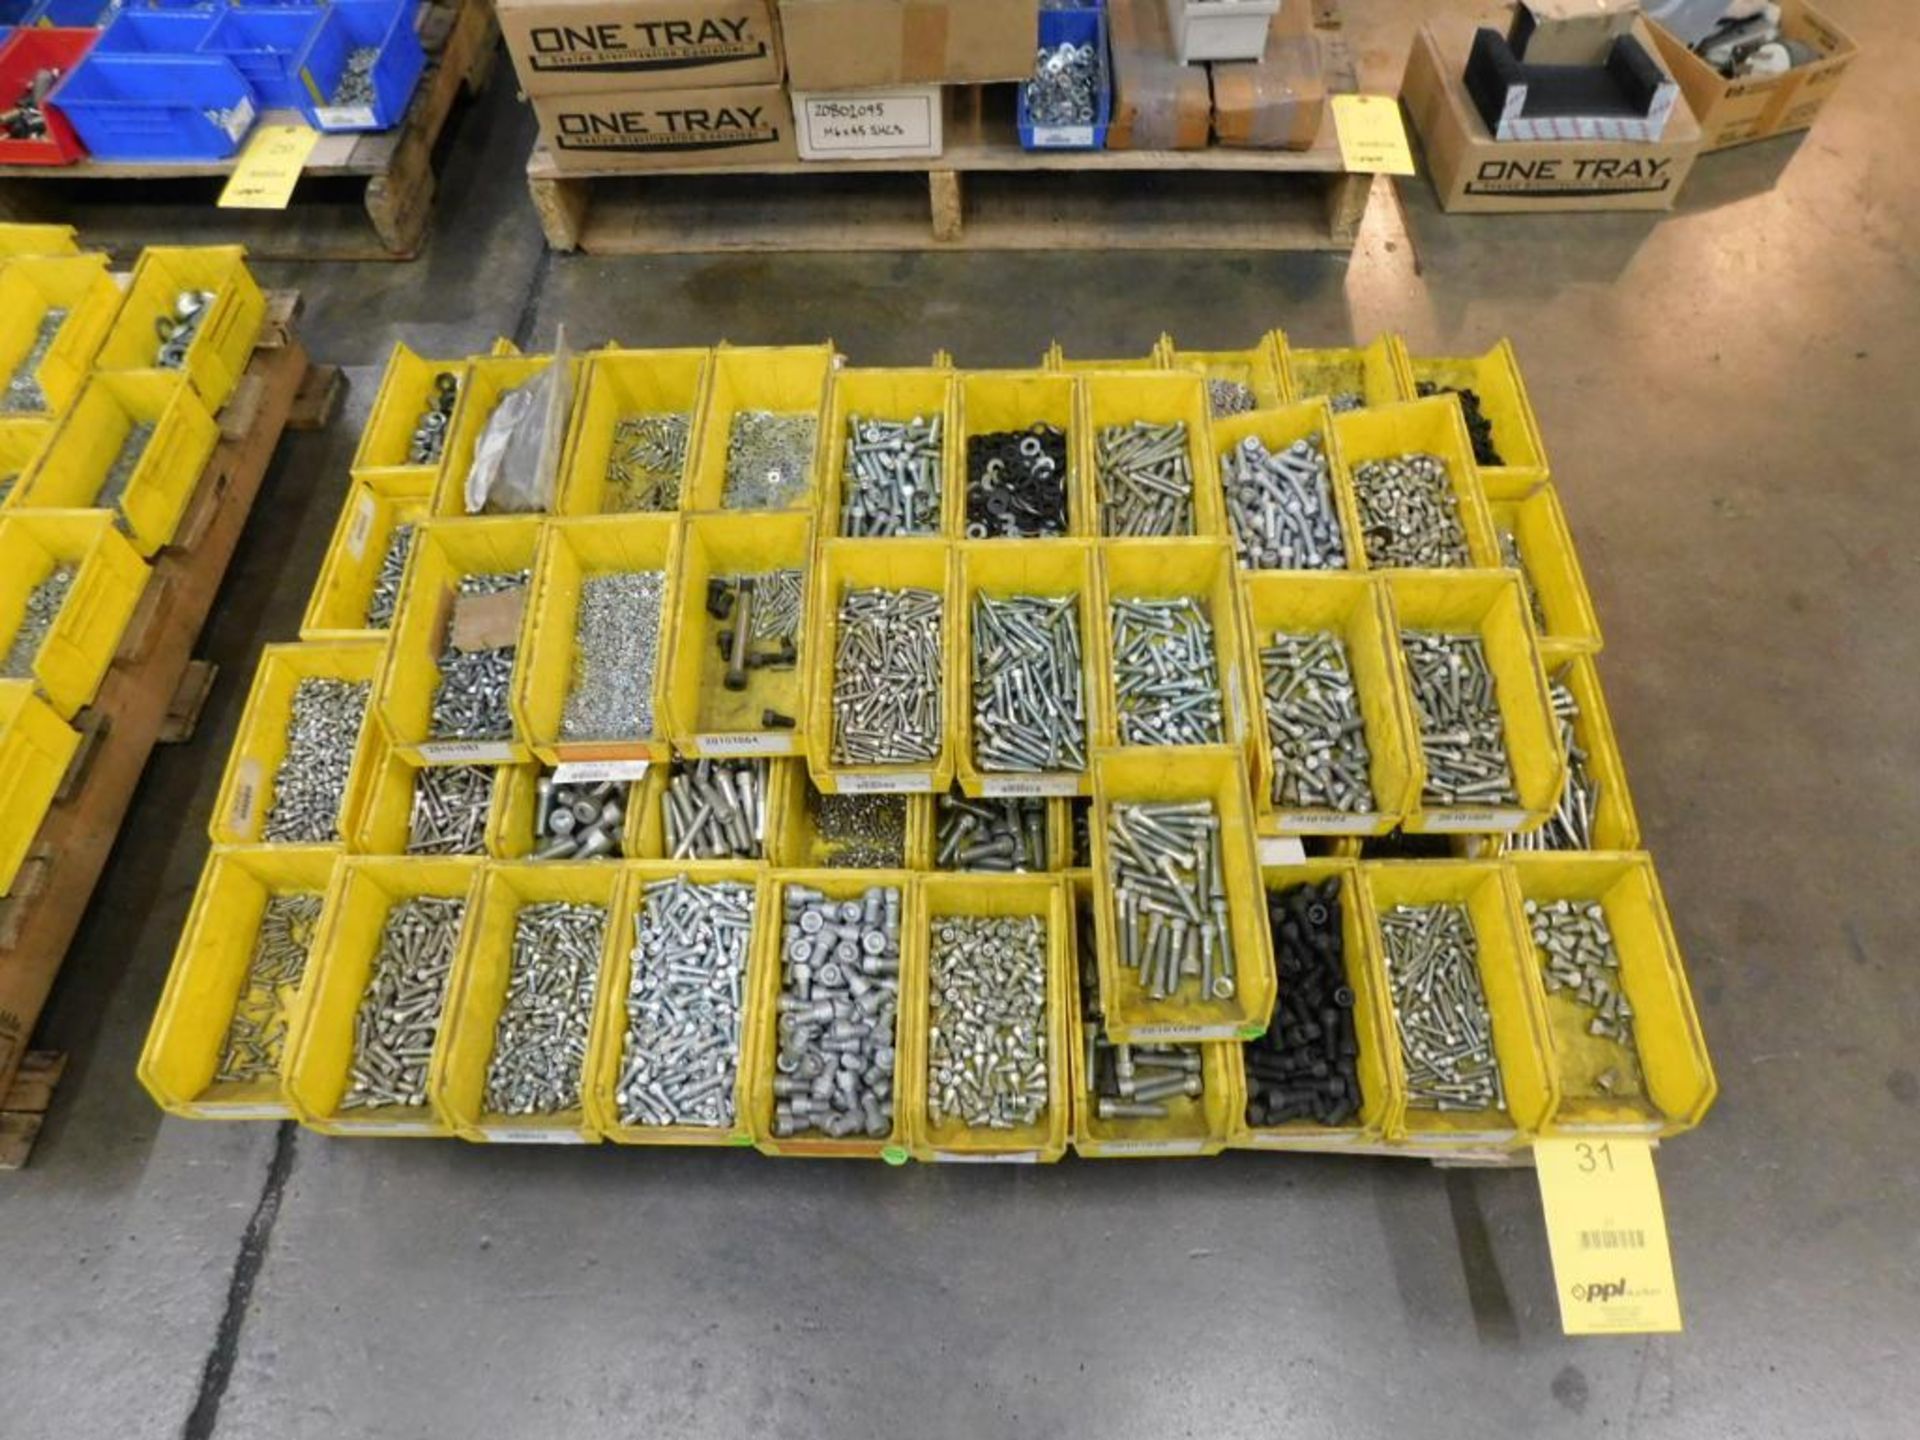 LOT: (1) Pallet of Assorted Hardware in Compartment Bins: Bolts, Nuts, Washer, etc.